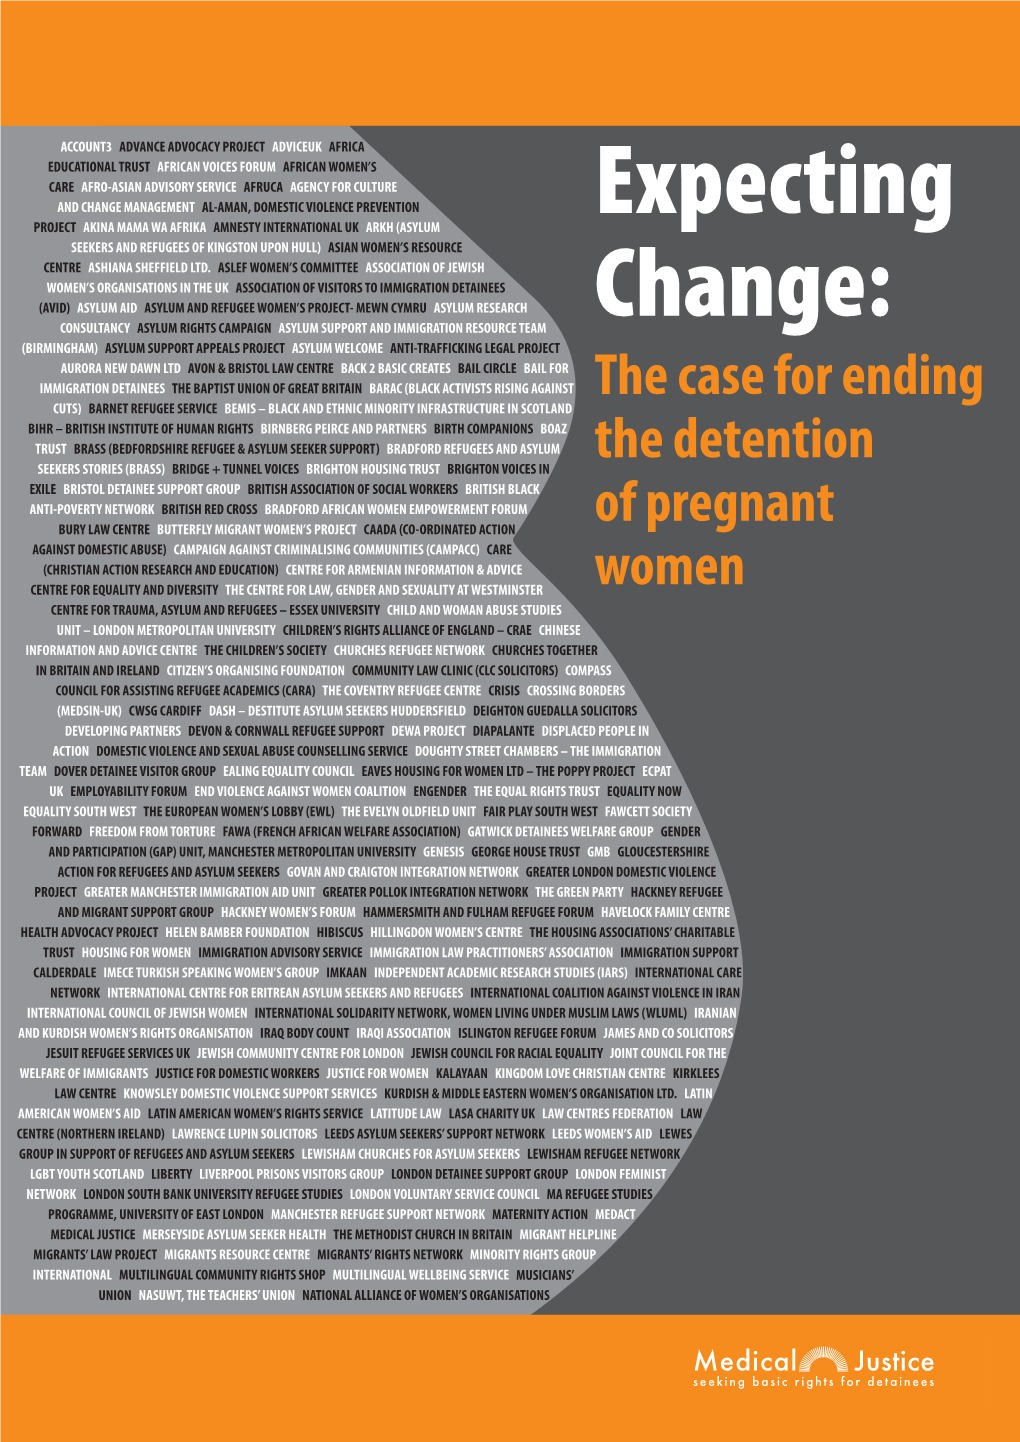 Expecting Change: the Case for Ending the Detention of Pregnant Women Is Published in 2013 by Medical Justice